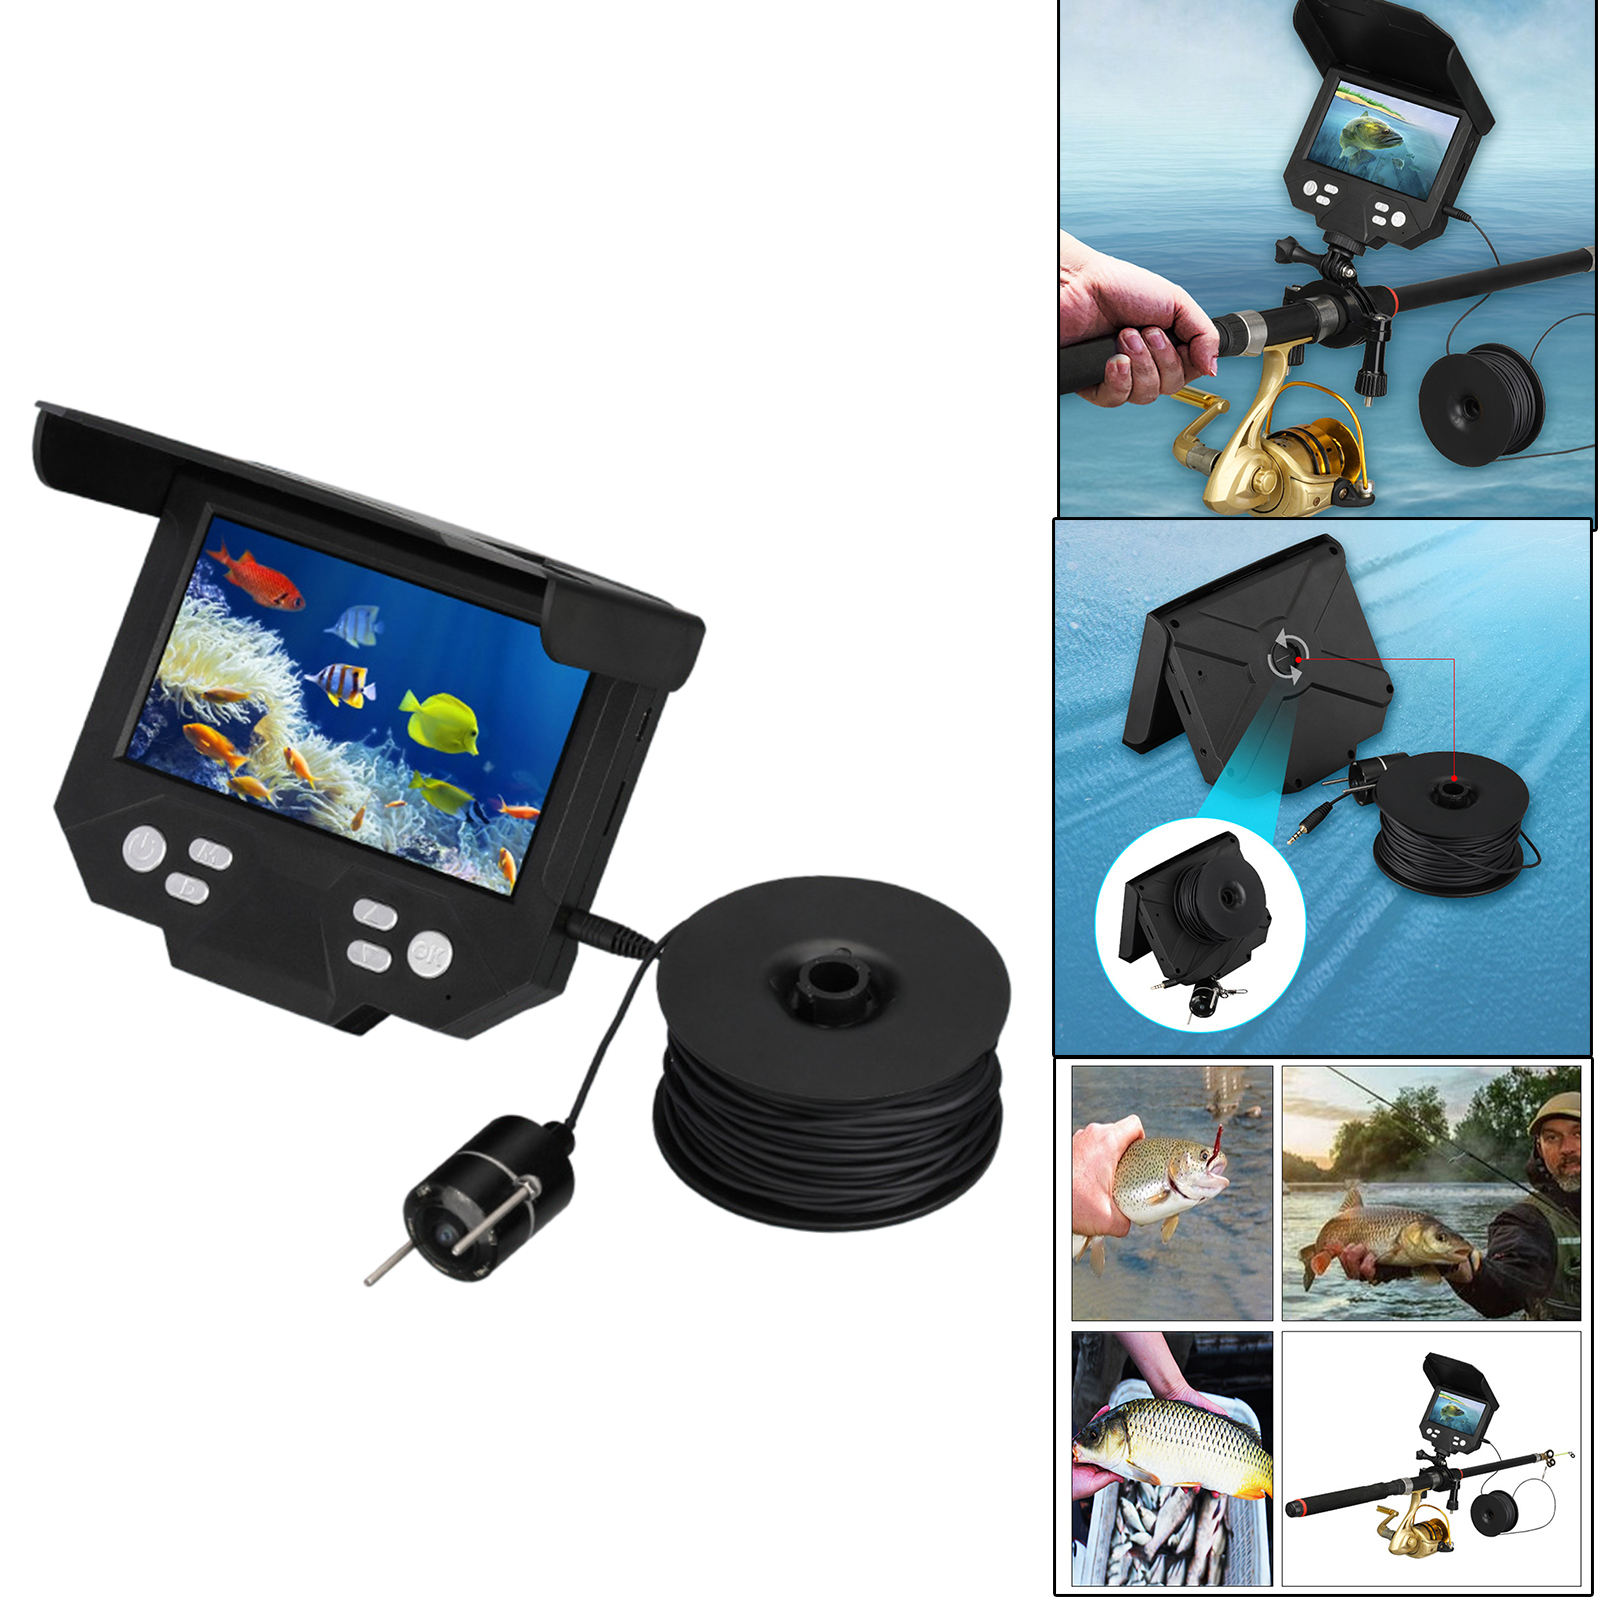 Fish139 Fish Finder Camera, 4.3inch LCD Monitor, 30M Depth, Tackles Infrared LED Light Night Visible Underwater Fishing Detector